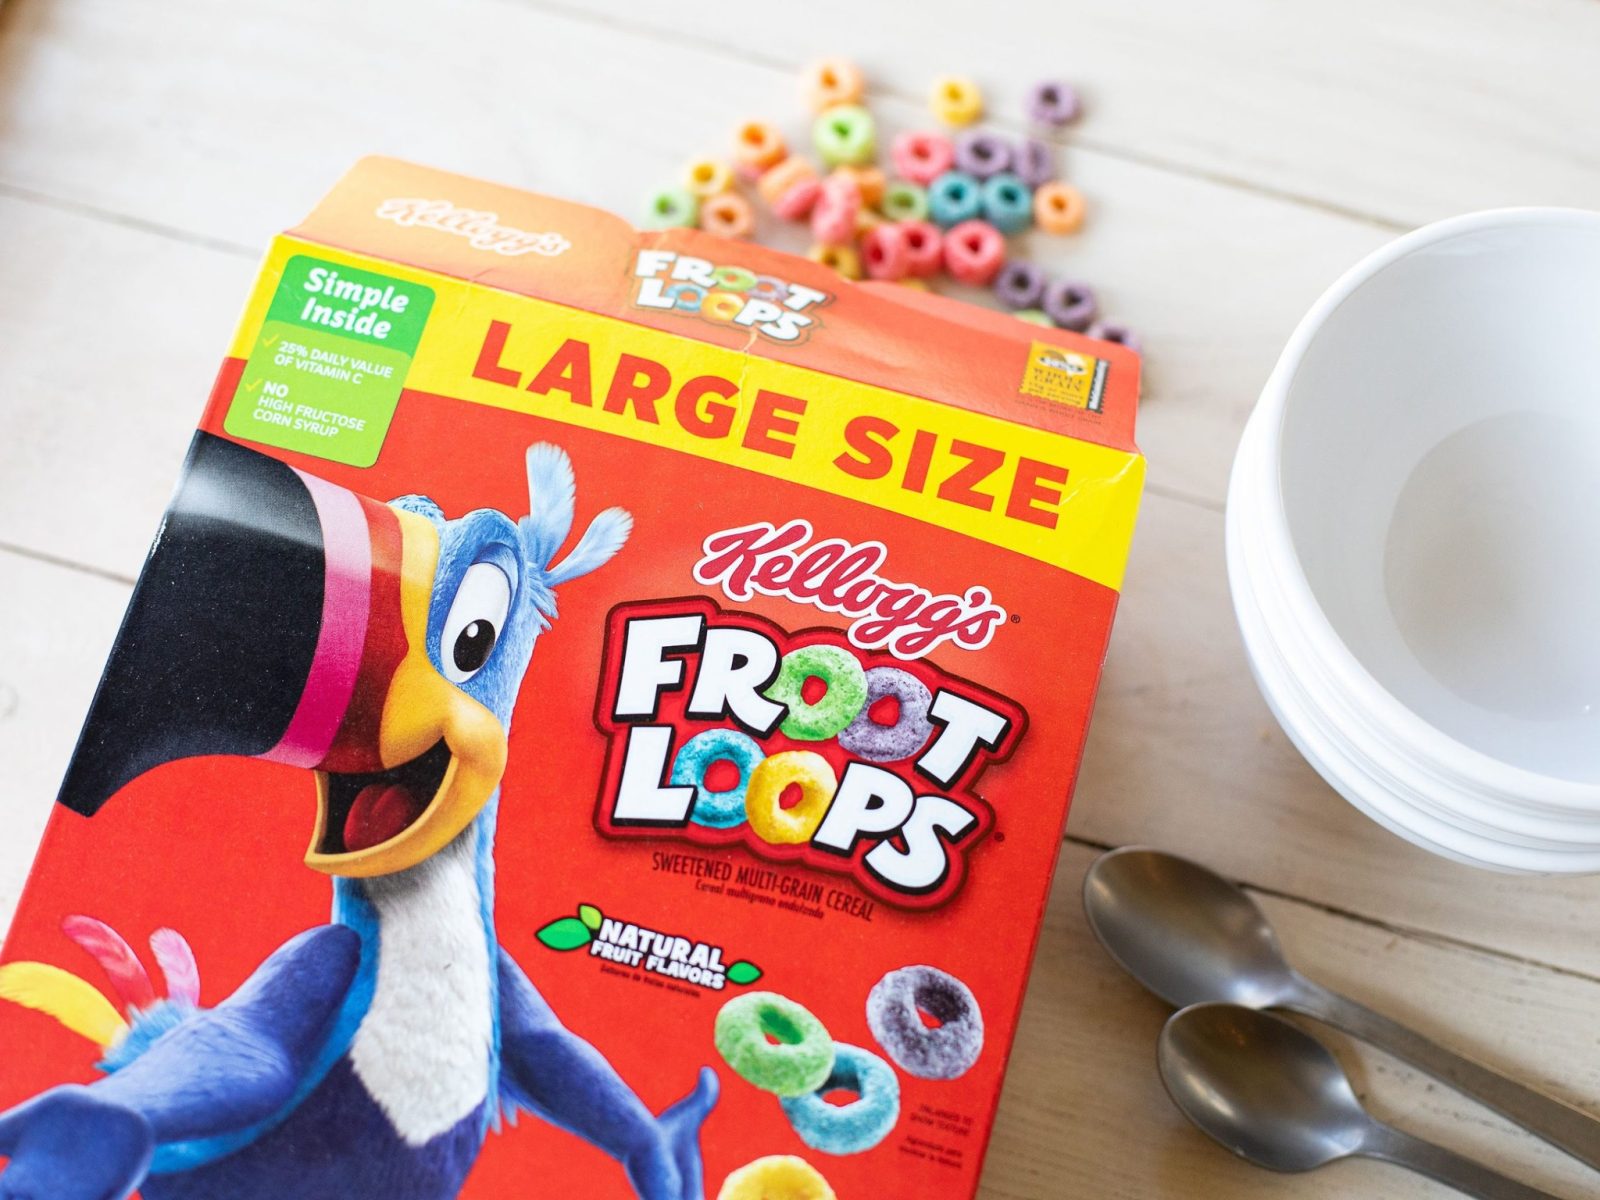 Large Size Boxes Of Kellogg’s Cereal As Low As $1.19 At Kroger